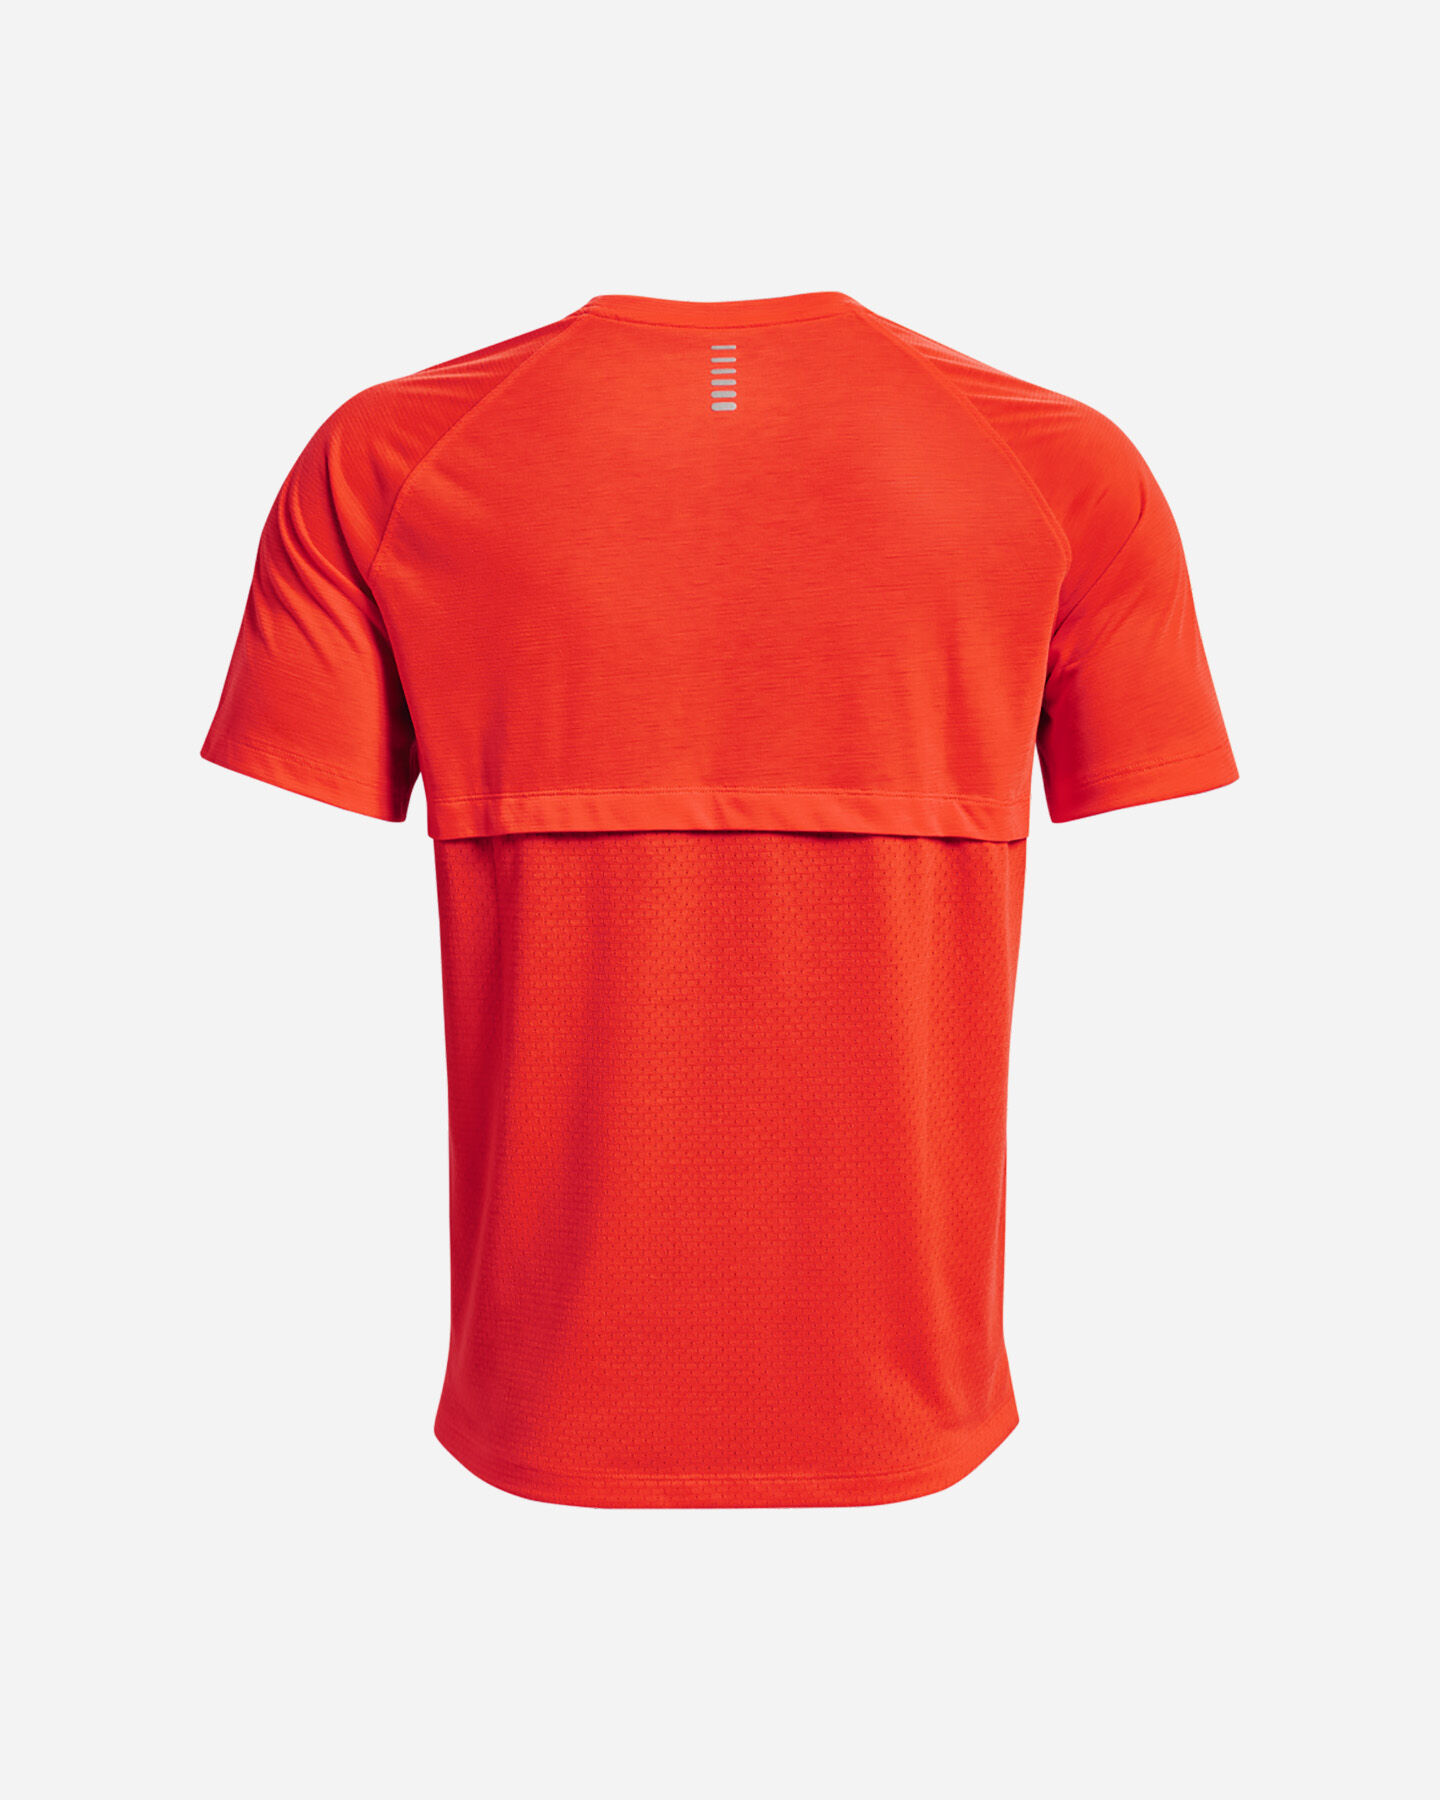  T-Shirt running UNDER ARMOUR STREAKER ROSSO M S5331860|0296|SM scatto 1